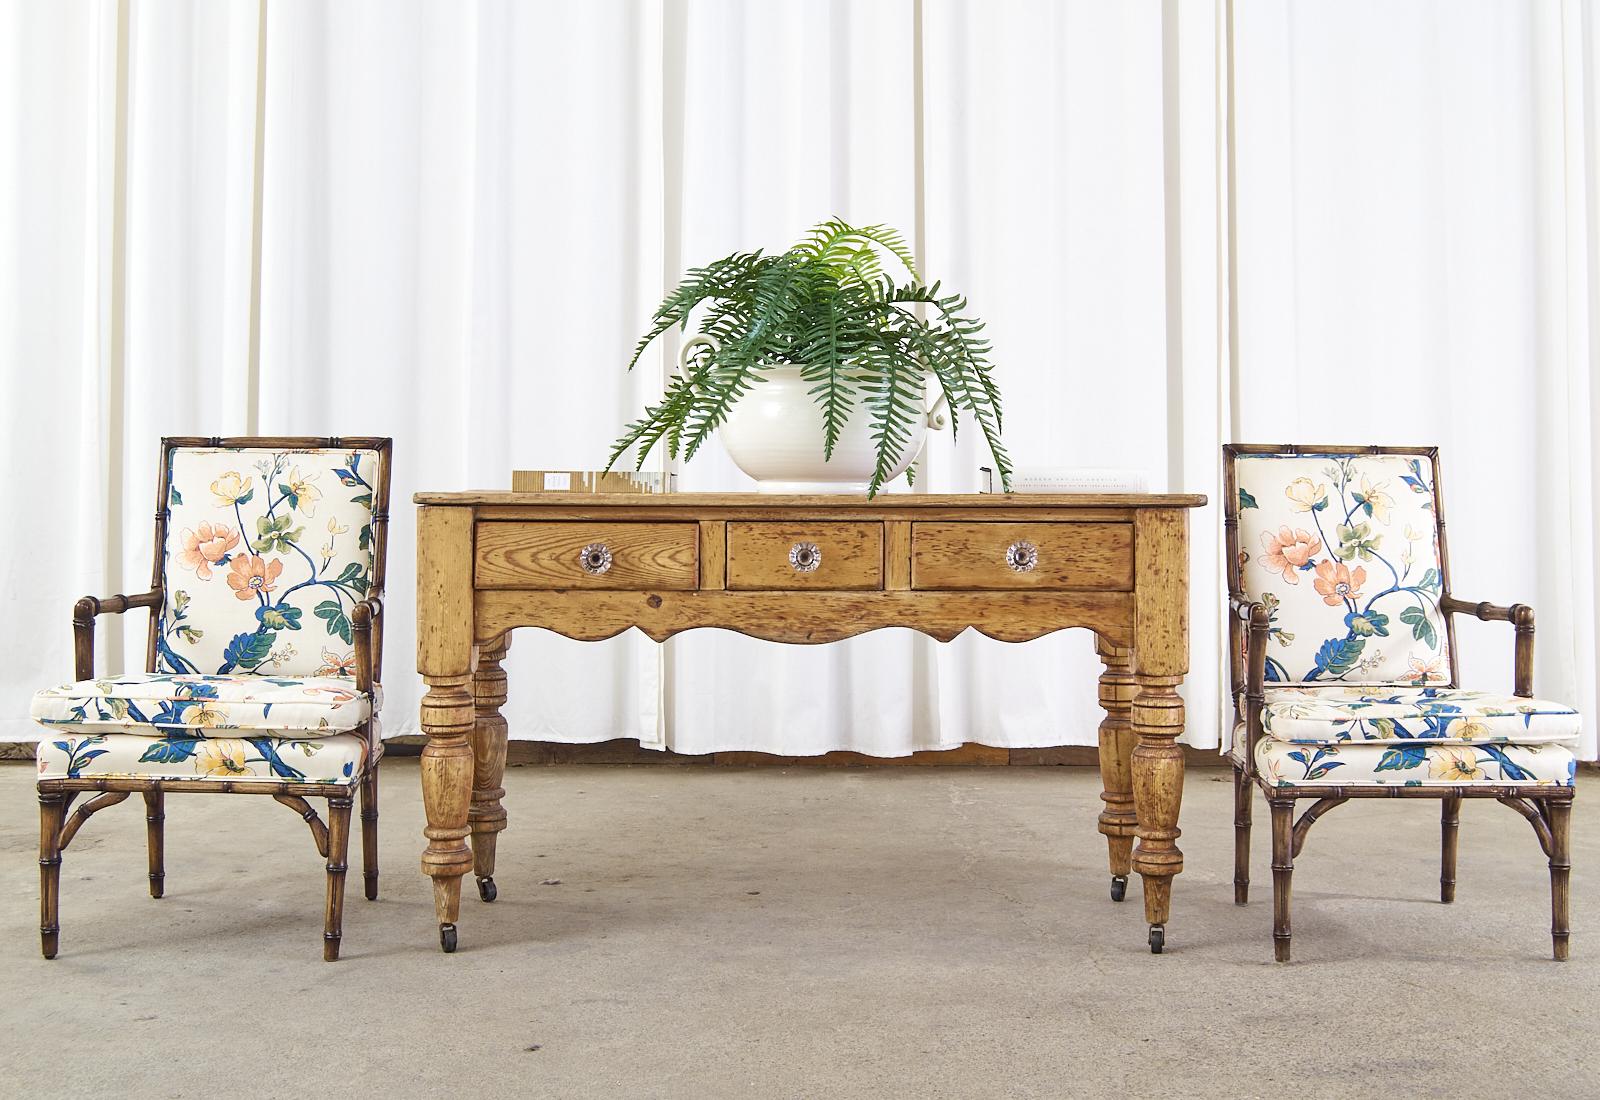 Rustic 19th century country French Provincial console table or server crafted from pine. The table has a plank top and is fronted by three storage drawers having shaped glass knobs. The console features a beautifully aged, distressed patina on the